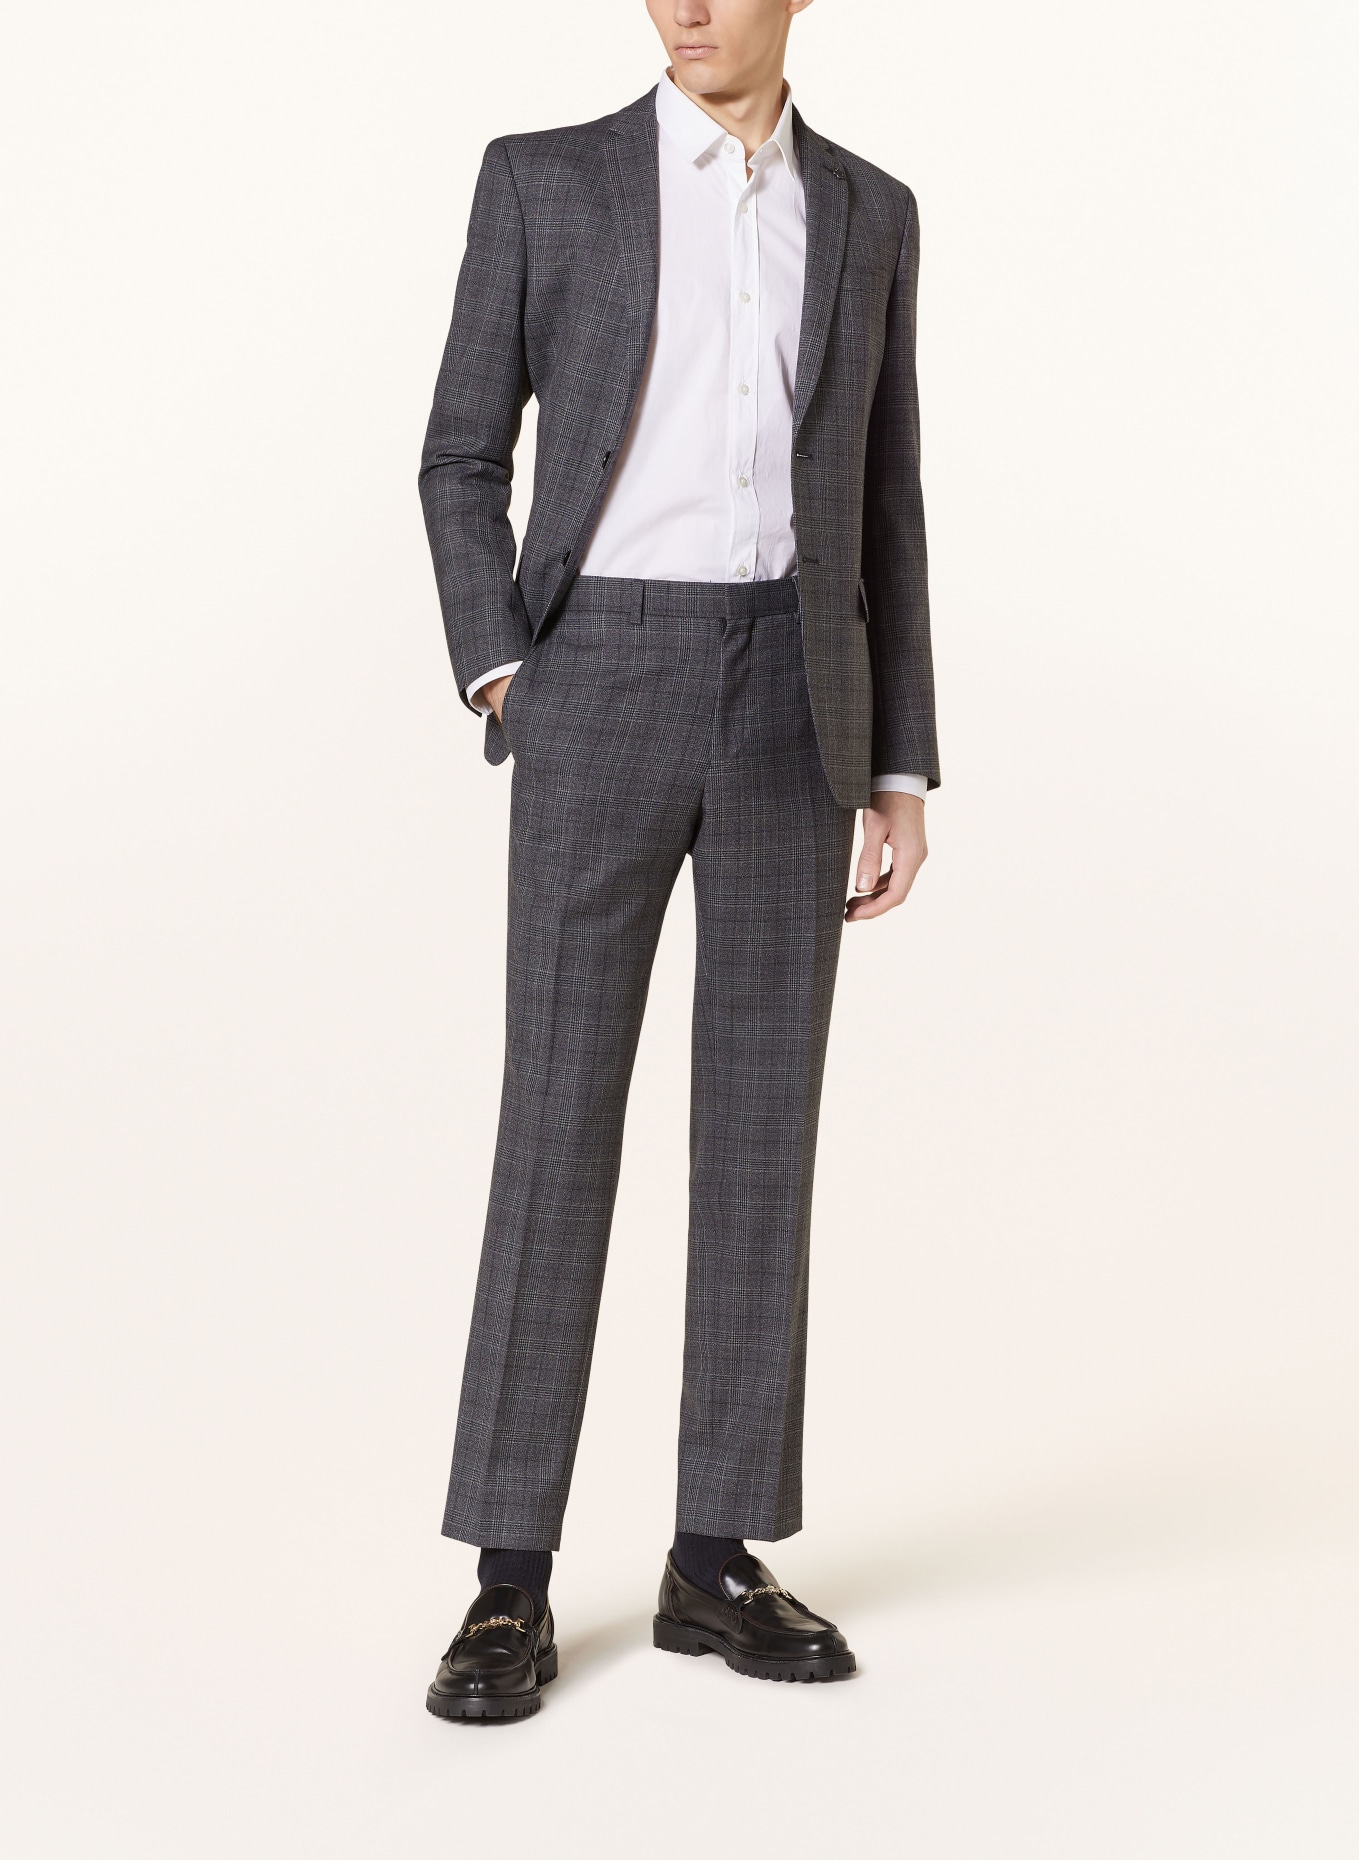 TED BAKER Anzughose ZIONST Slim Fit, Farbe: CHARCOAL CHARCOAL (Bild 2)